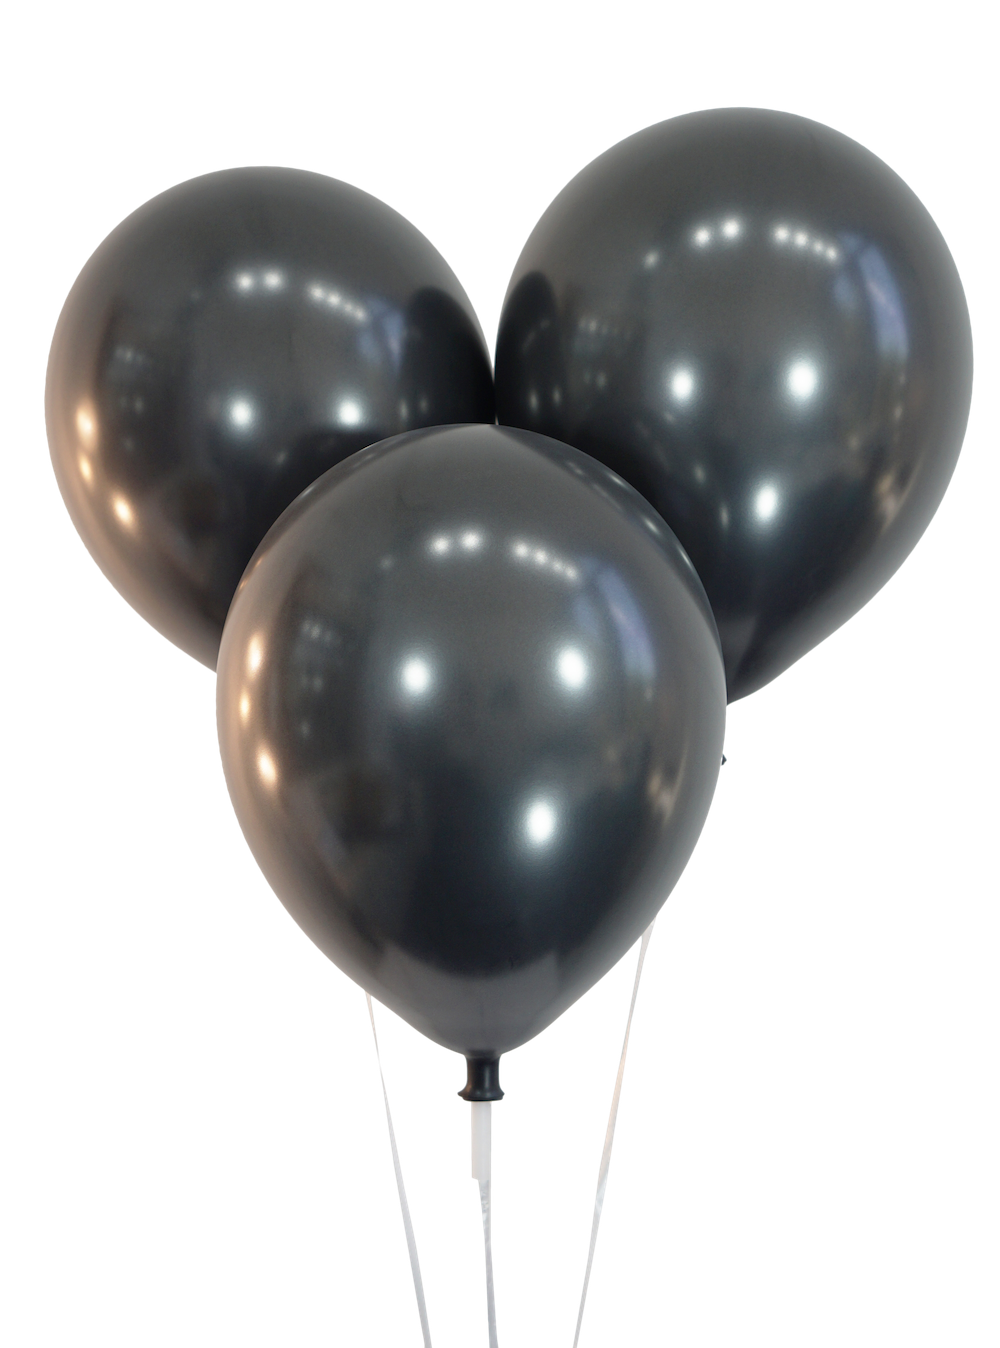 Black Balloons PNG Background Image